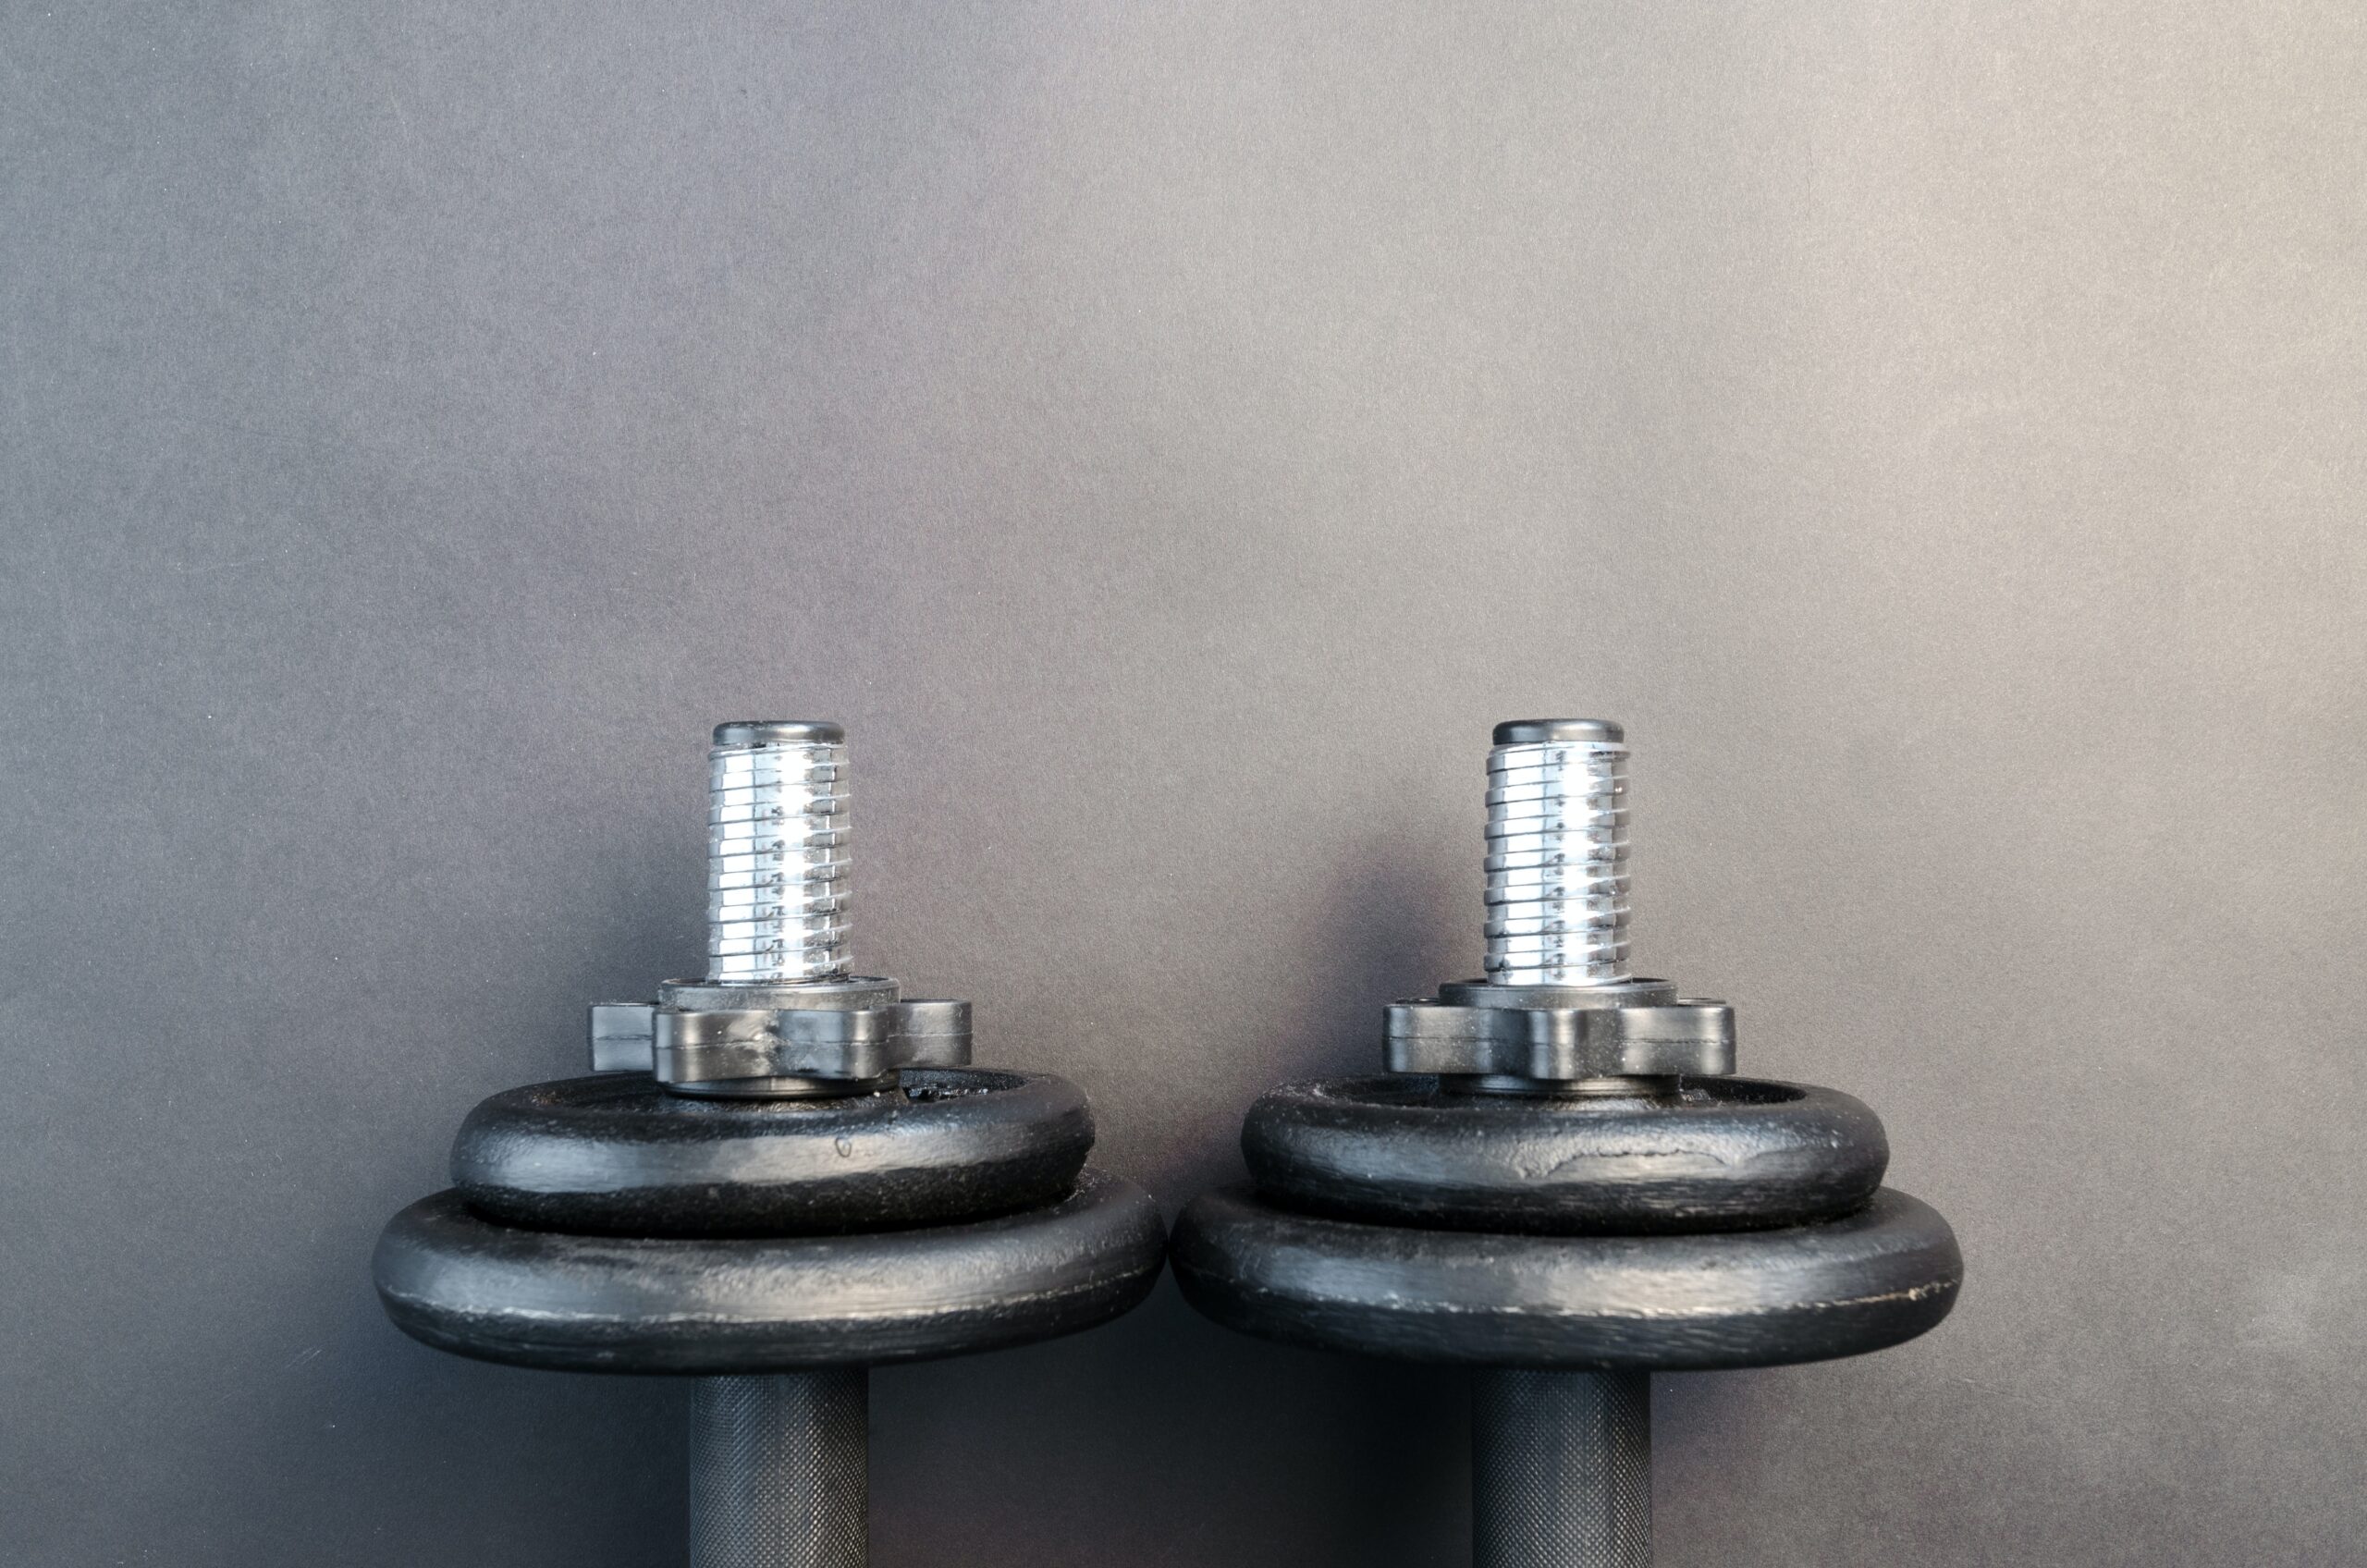 black and gray dumbbells against gray background